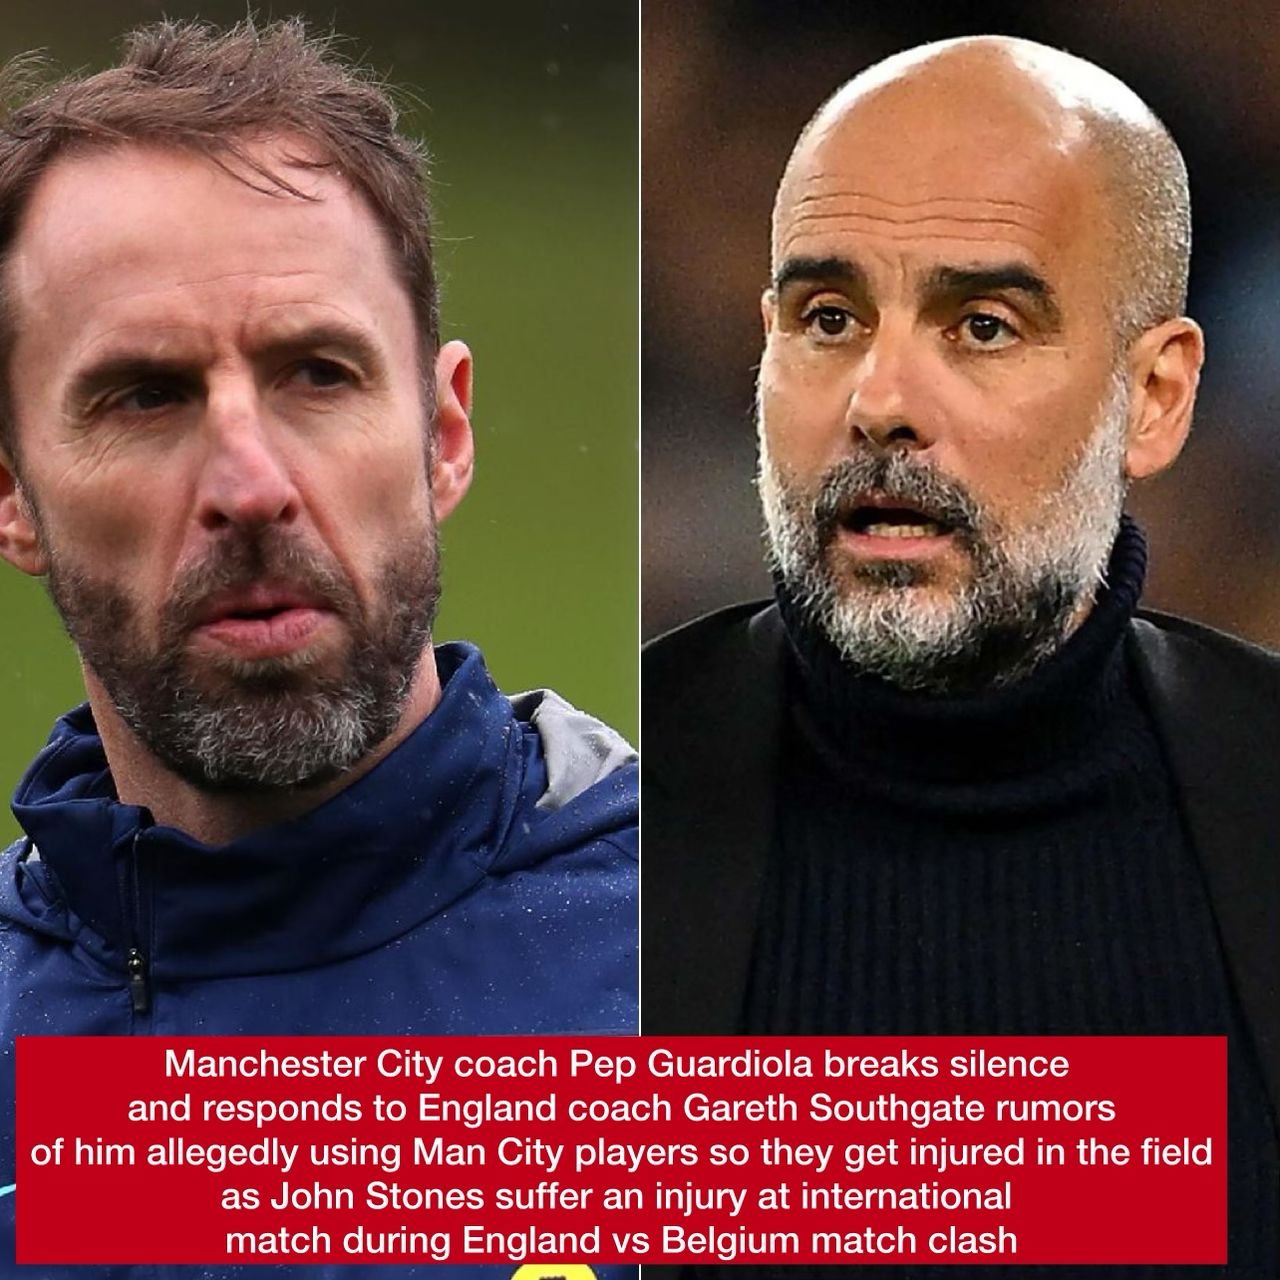 Manchester City coach Pep Guardiola breaks silence and responds to Southgate accusation of him using Man City players so they get injured in the field as John Stones suffer an injury at international match during England vs Belgium match clash